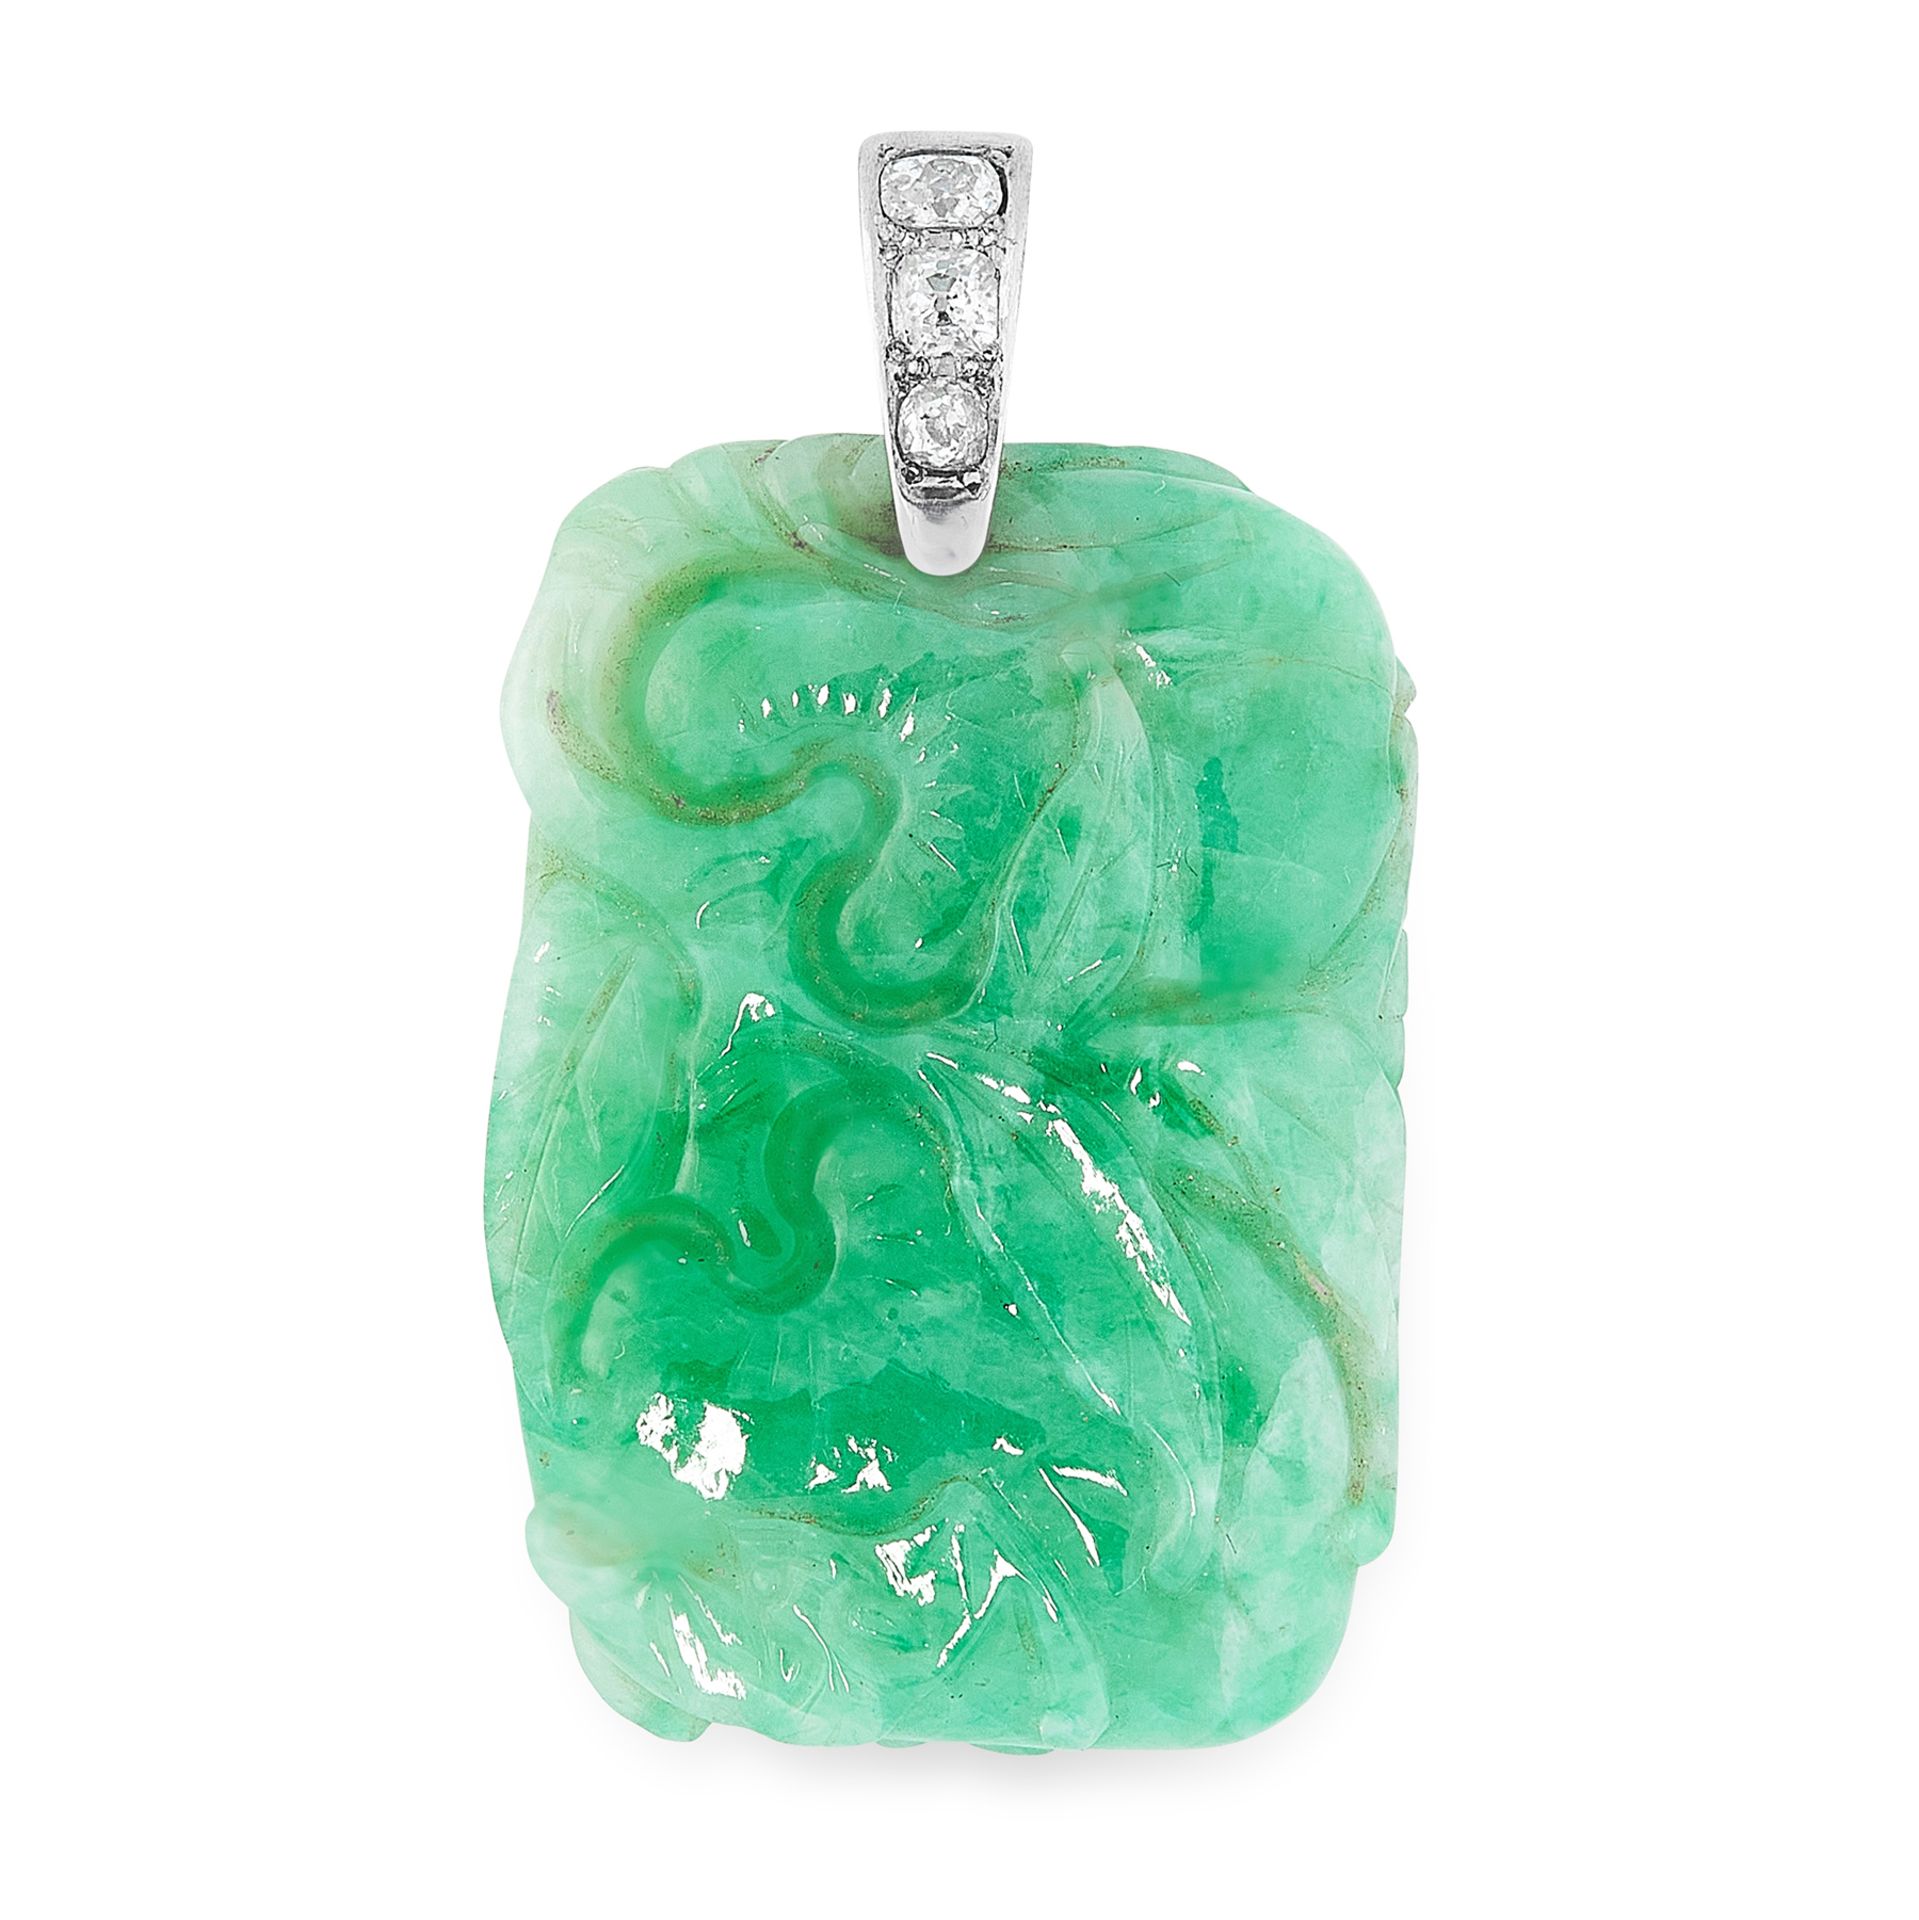 A CHINESE JADEITE JADE AND DIAMOND PENDANT comprising a carved and polished piece of jadeite